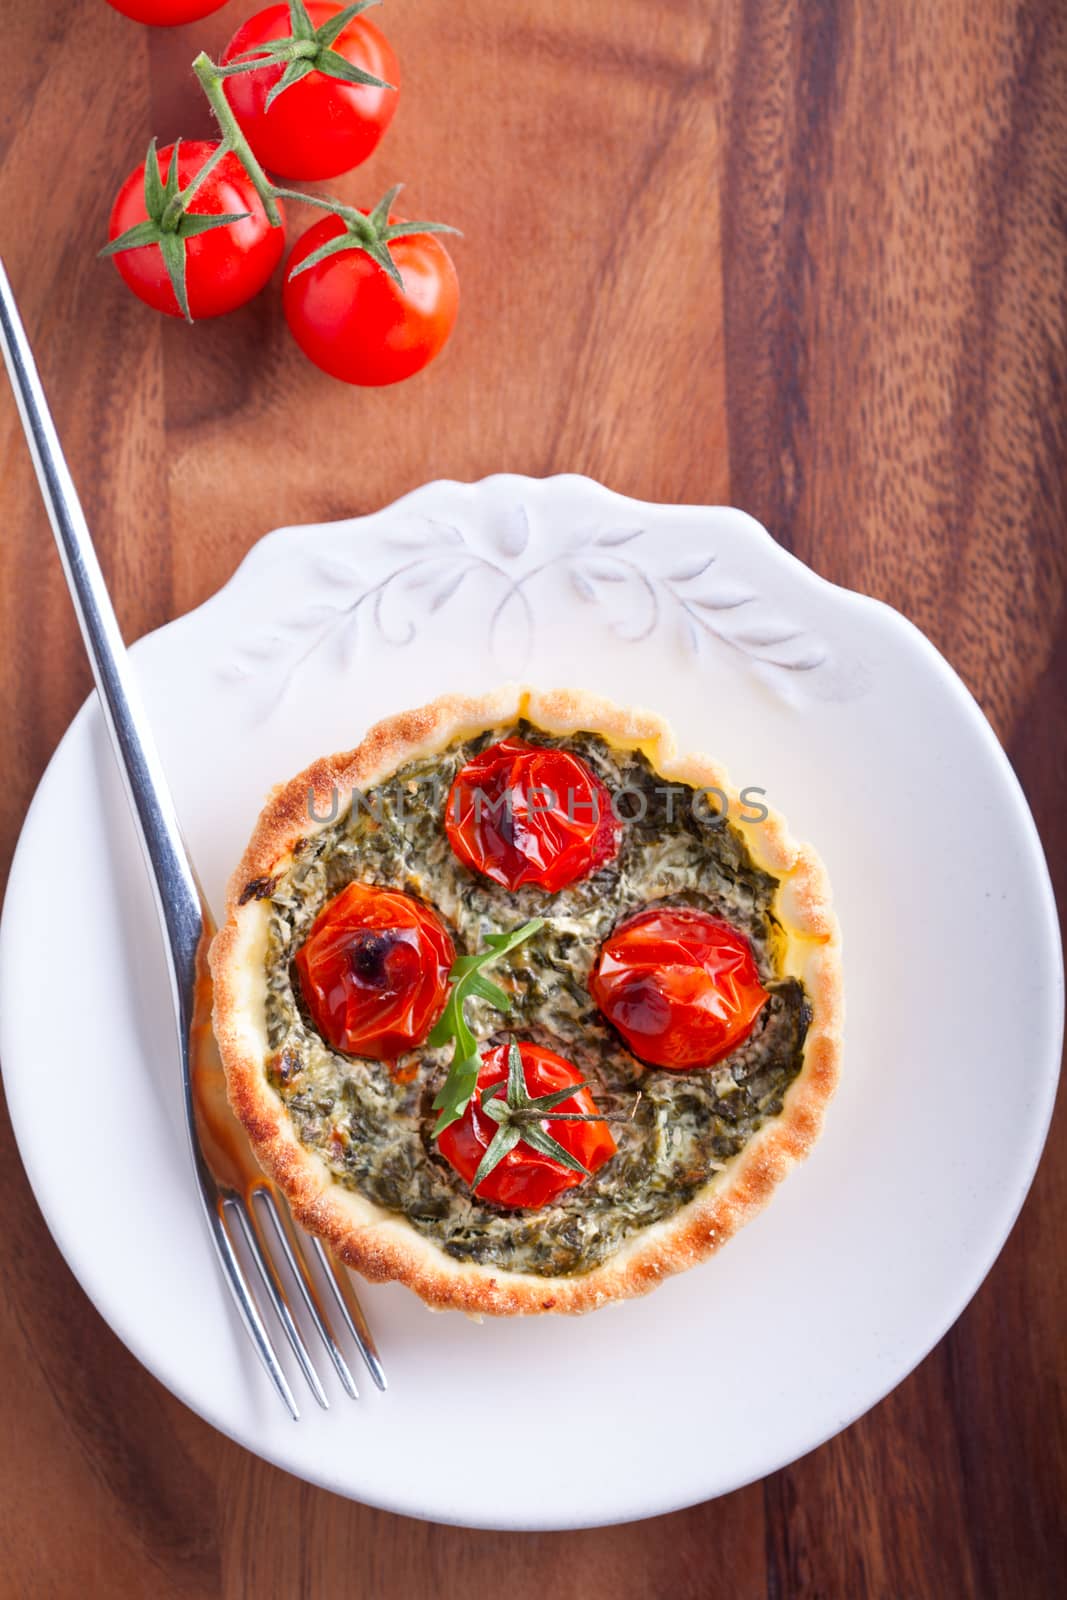 Mini Spinach Quiche with tomato served on a plate